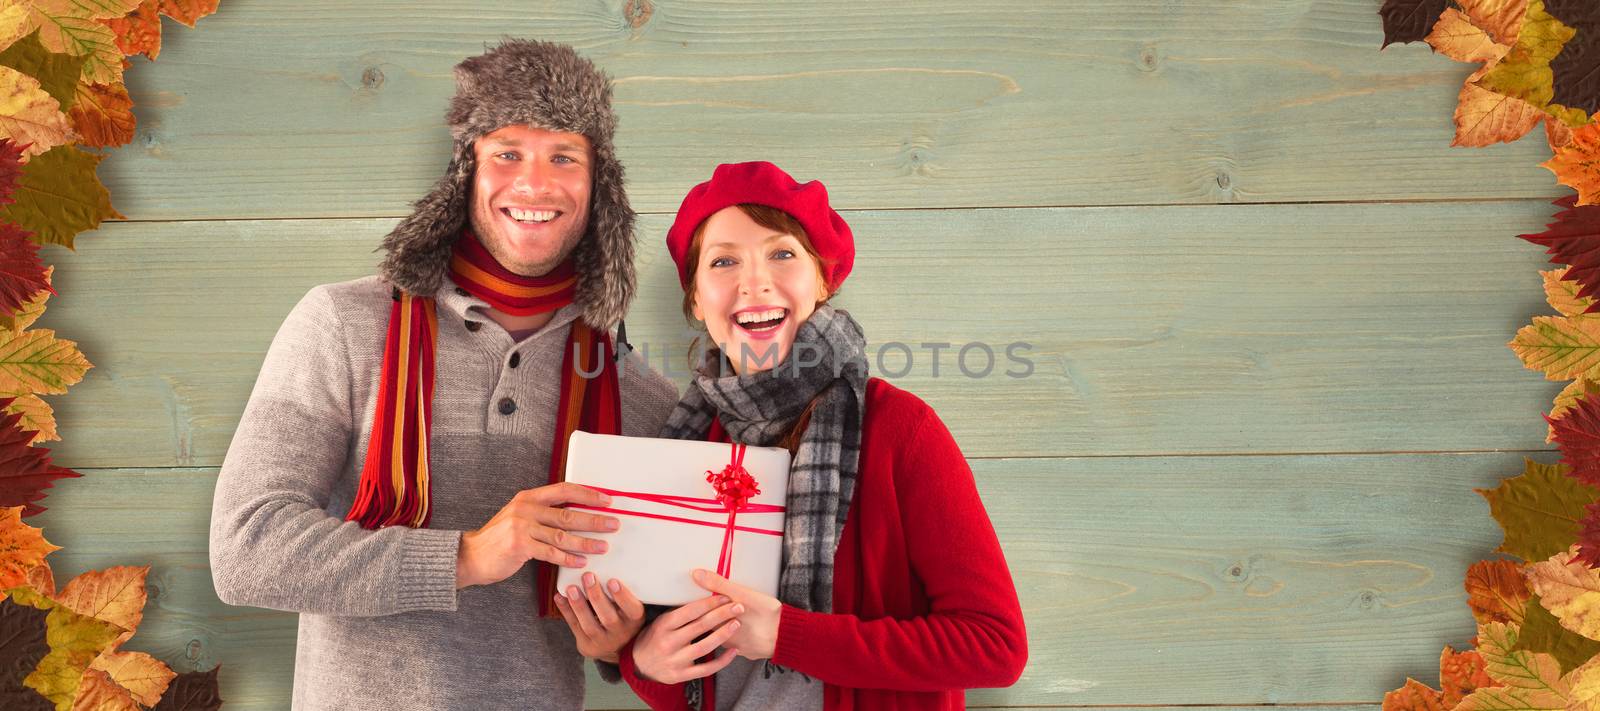 Couple smiling and holding gift against bleached wooden planks background